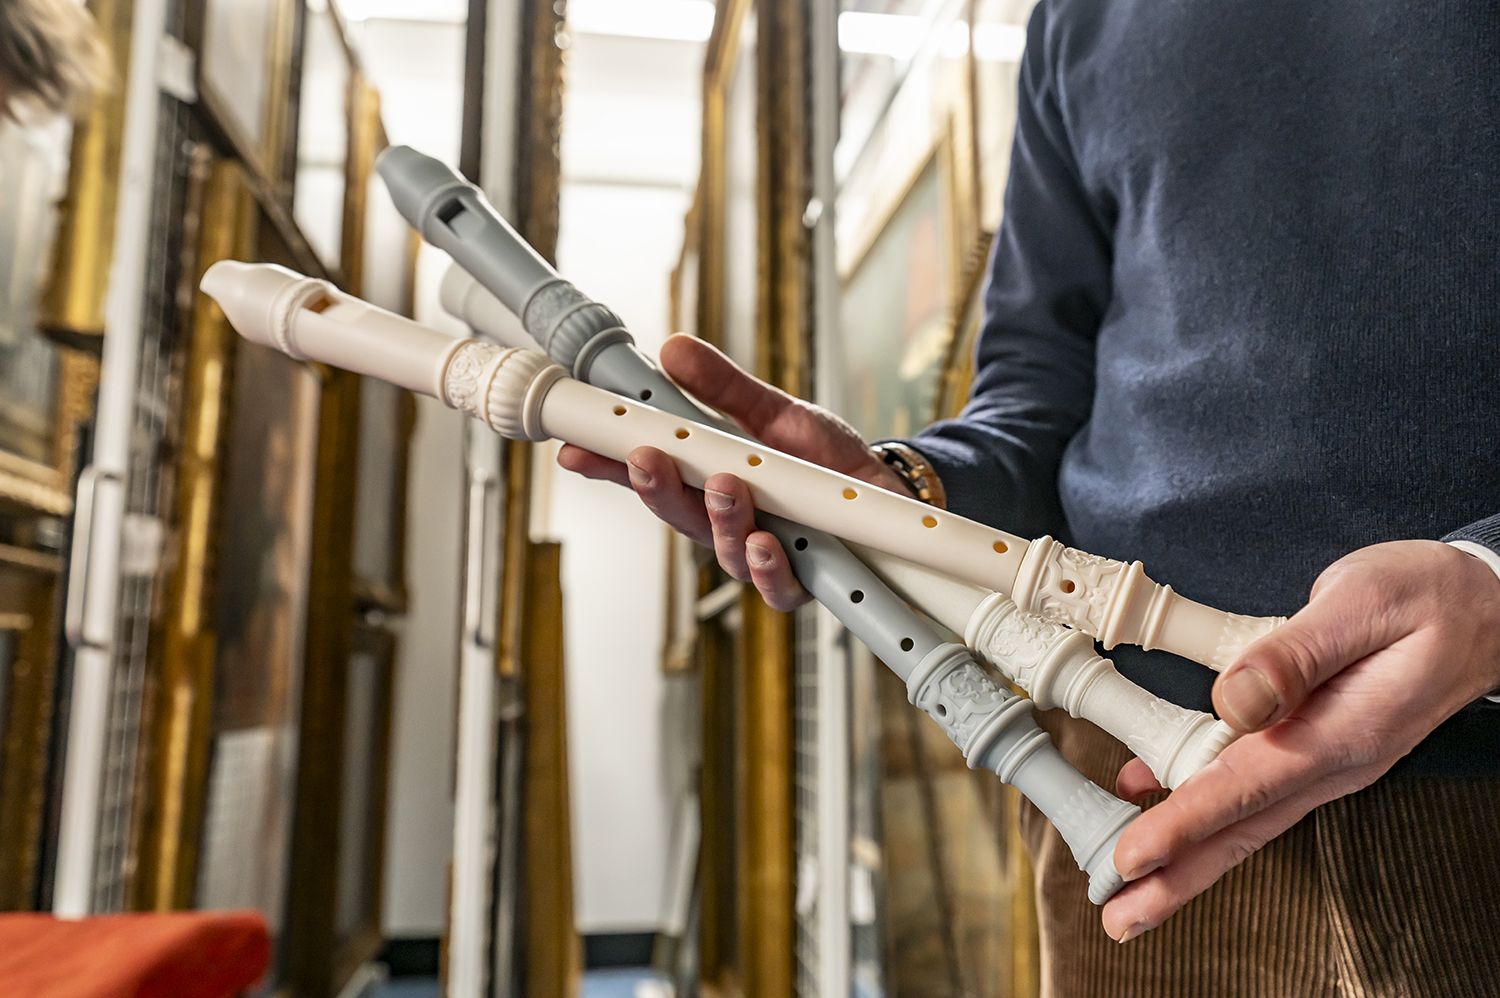 A close up image of someone holding three 3d printed recorders